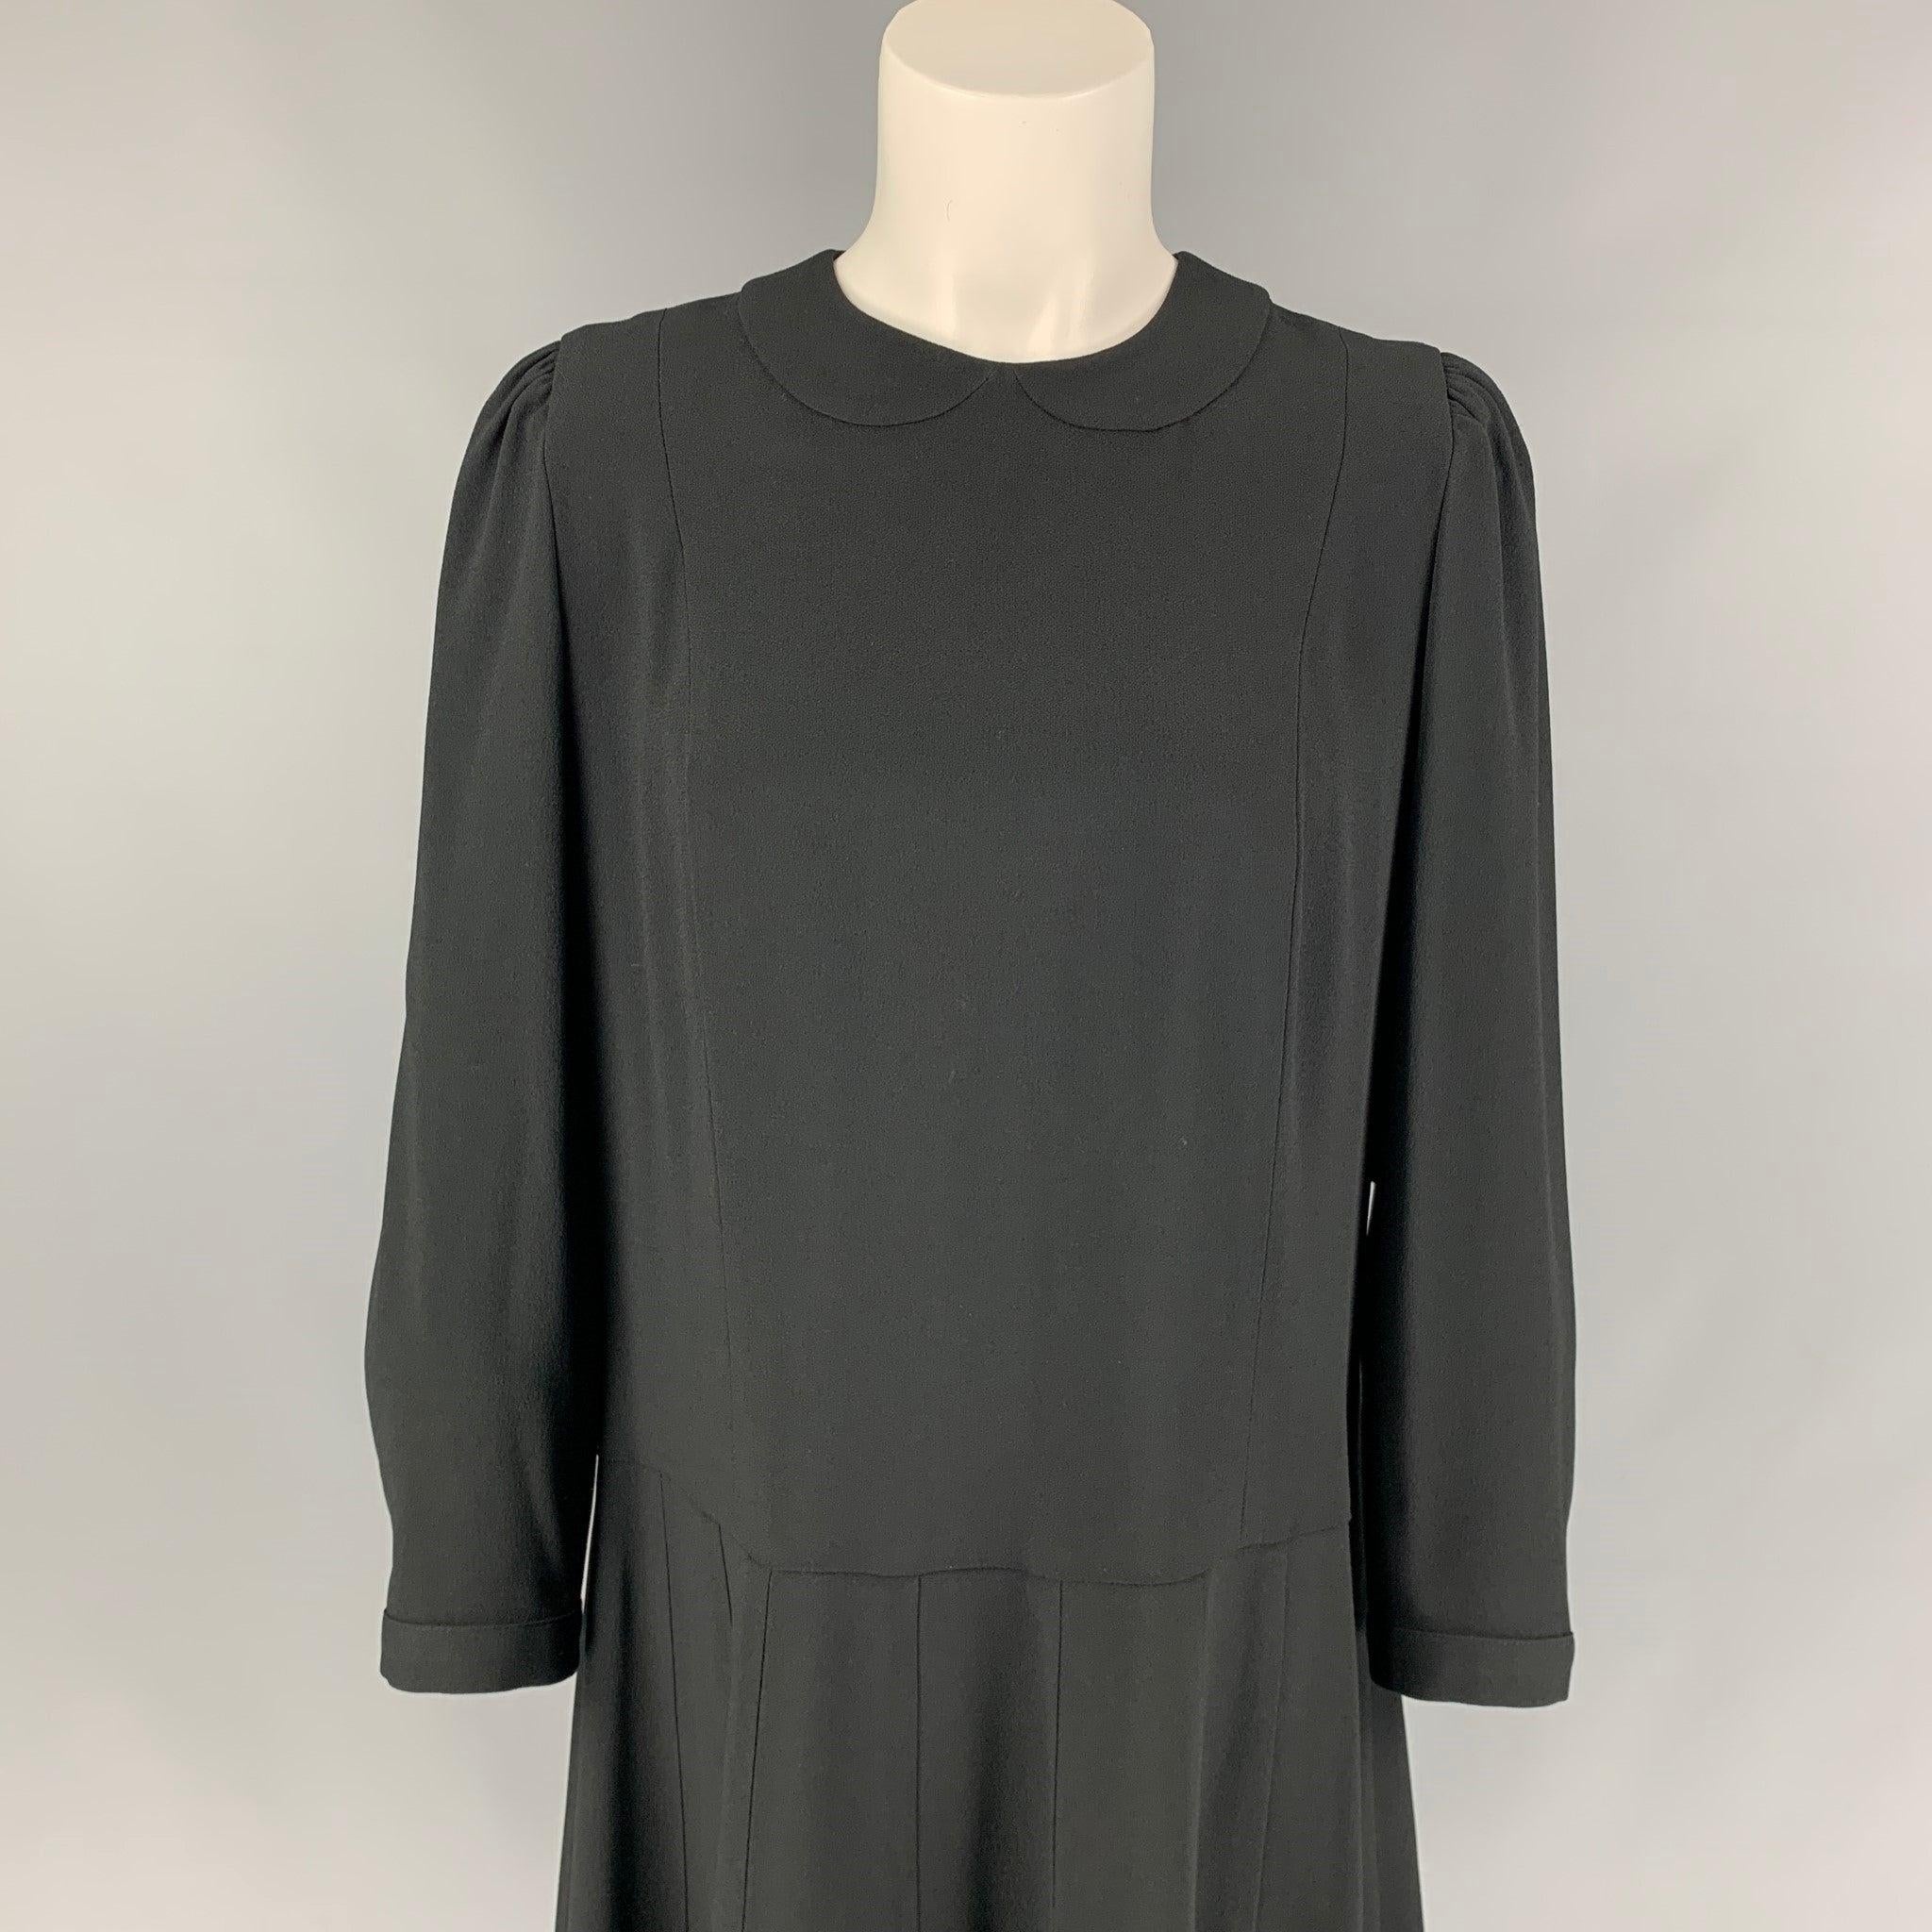 MARC JACOBS RUNWAY dress comes in a black acetate / viscose featuring an a-line style, long buttoned sleeves, pleated skirt, back bow details, and a hook & loop closure. Made in USA. Very Good
Pre-Owned Condition. 

Marked:   6 

Measurements: 
